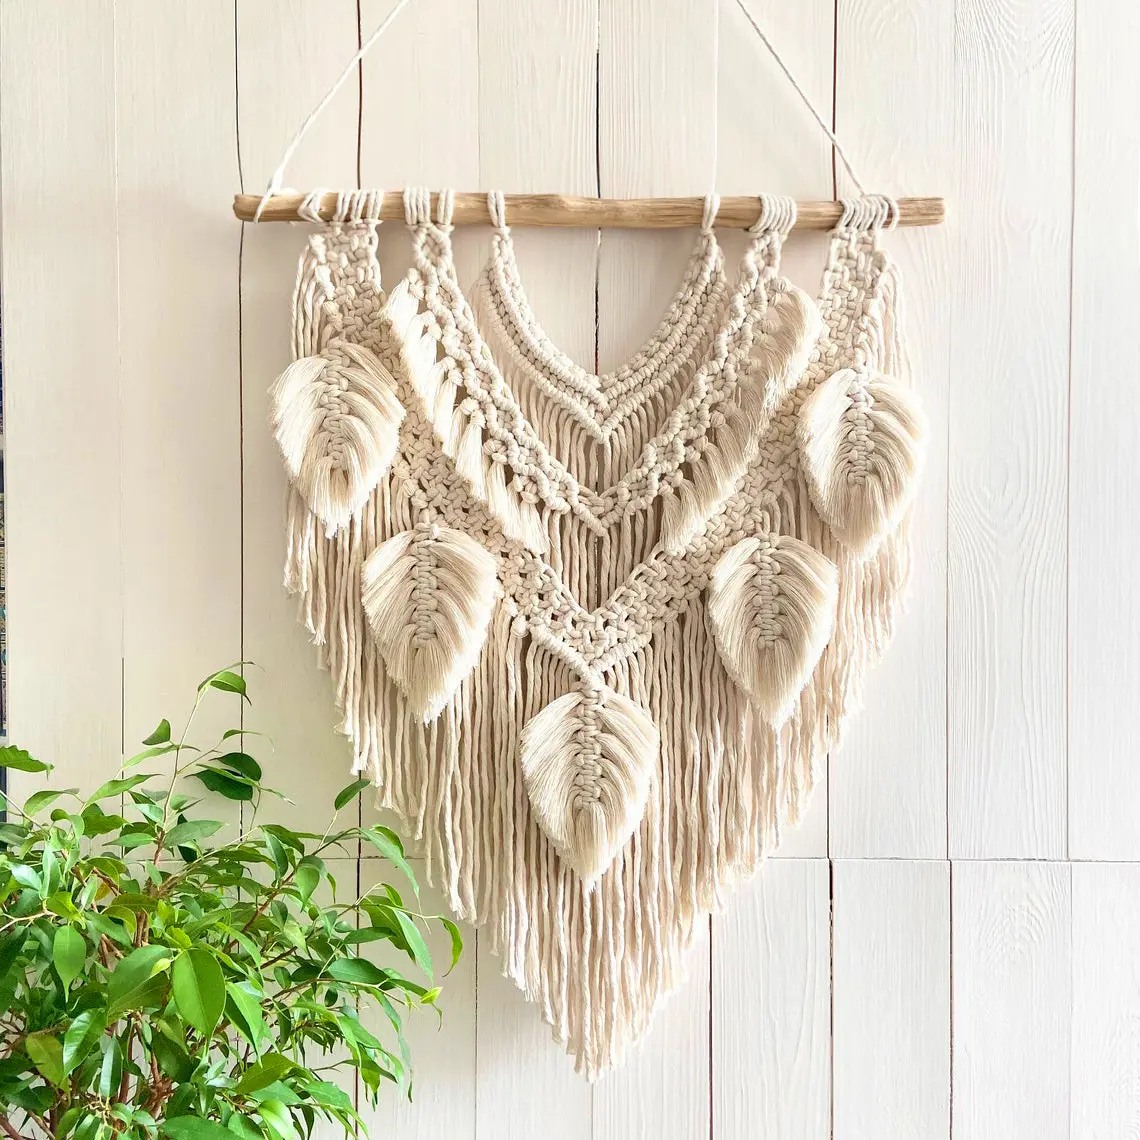 Nordic Home Accessories Large Cotton Woven Macrame Leaf Wall Hanging Tapestry Handmade Living Room Fall Decor